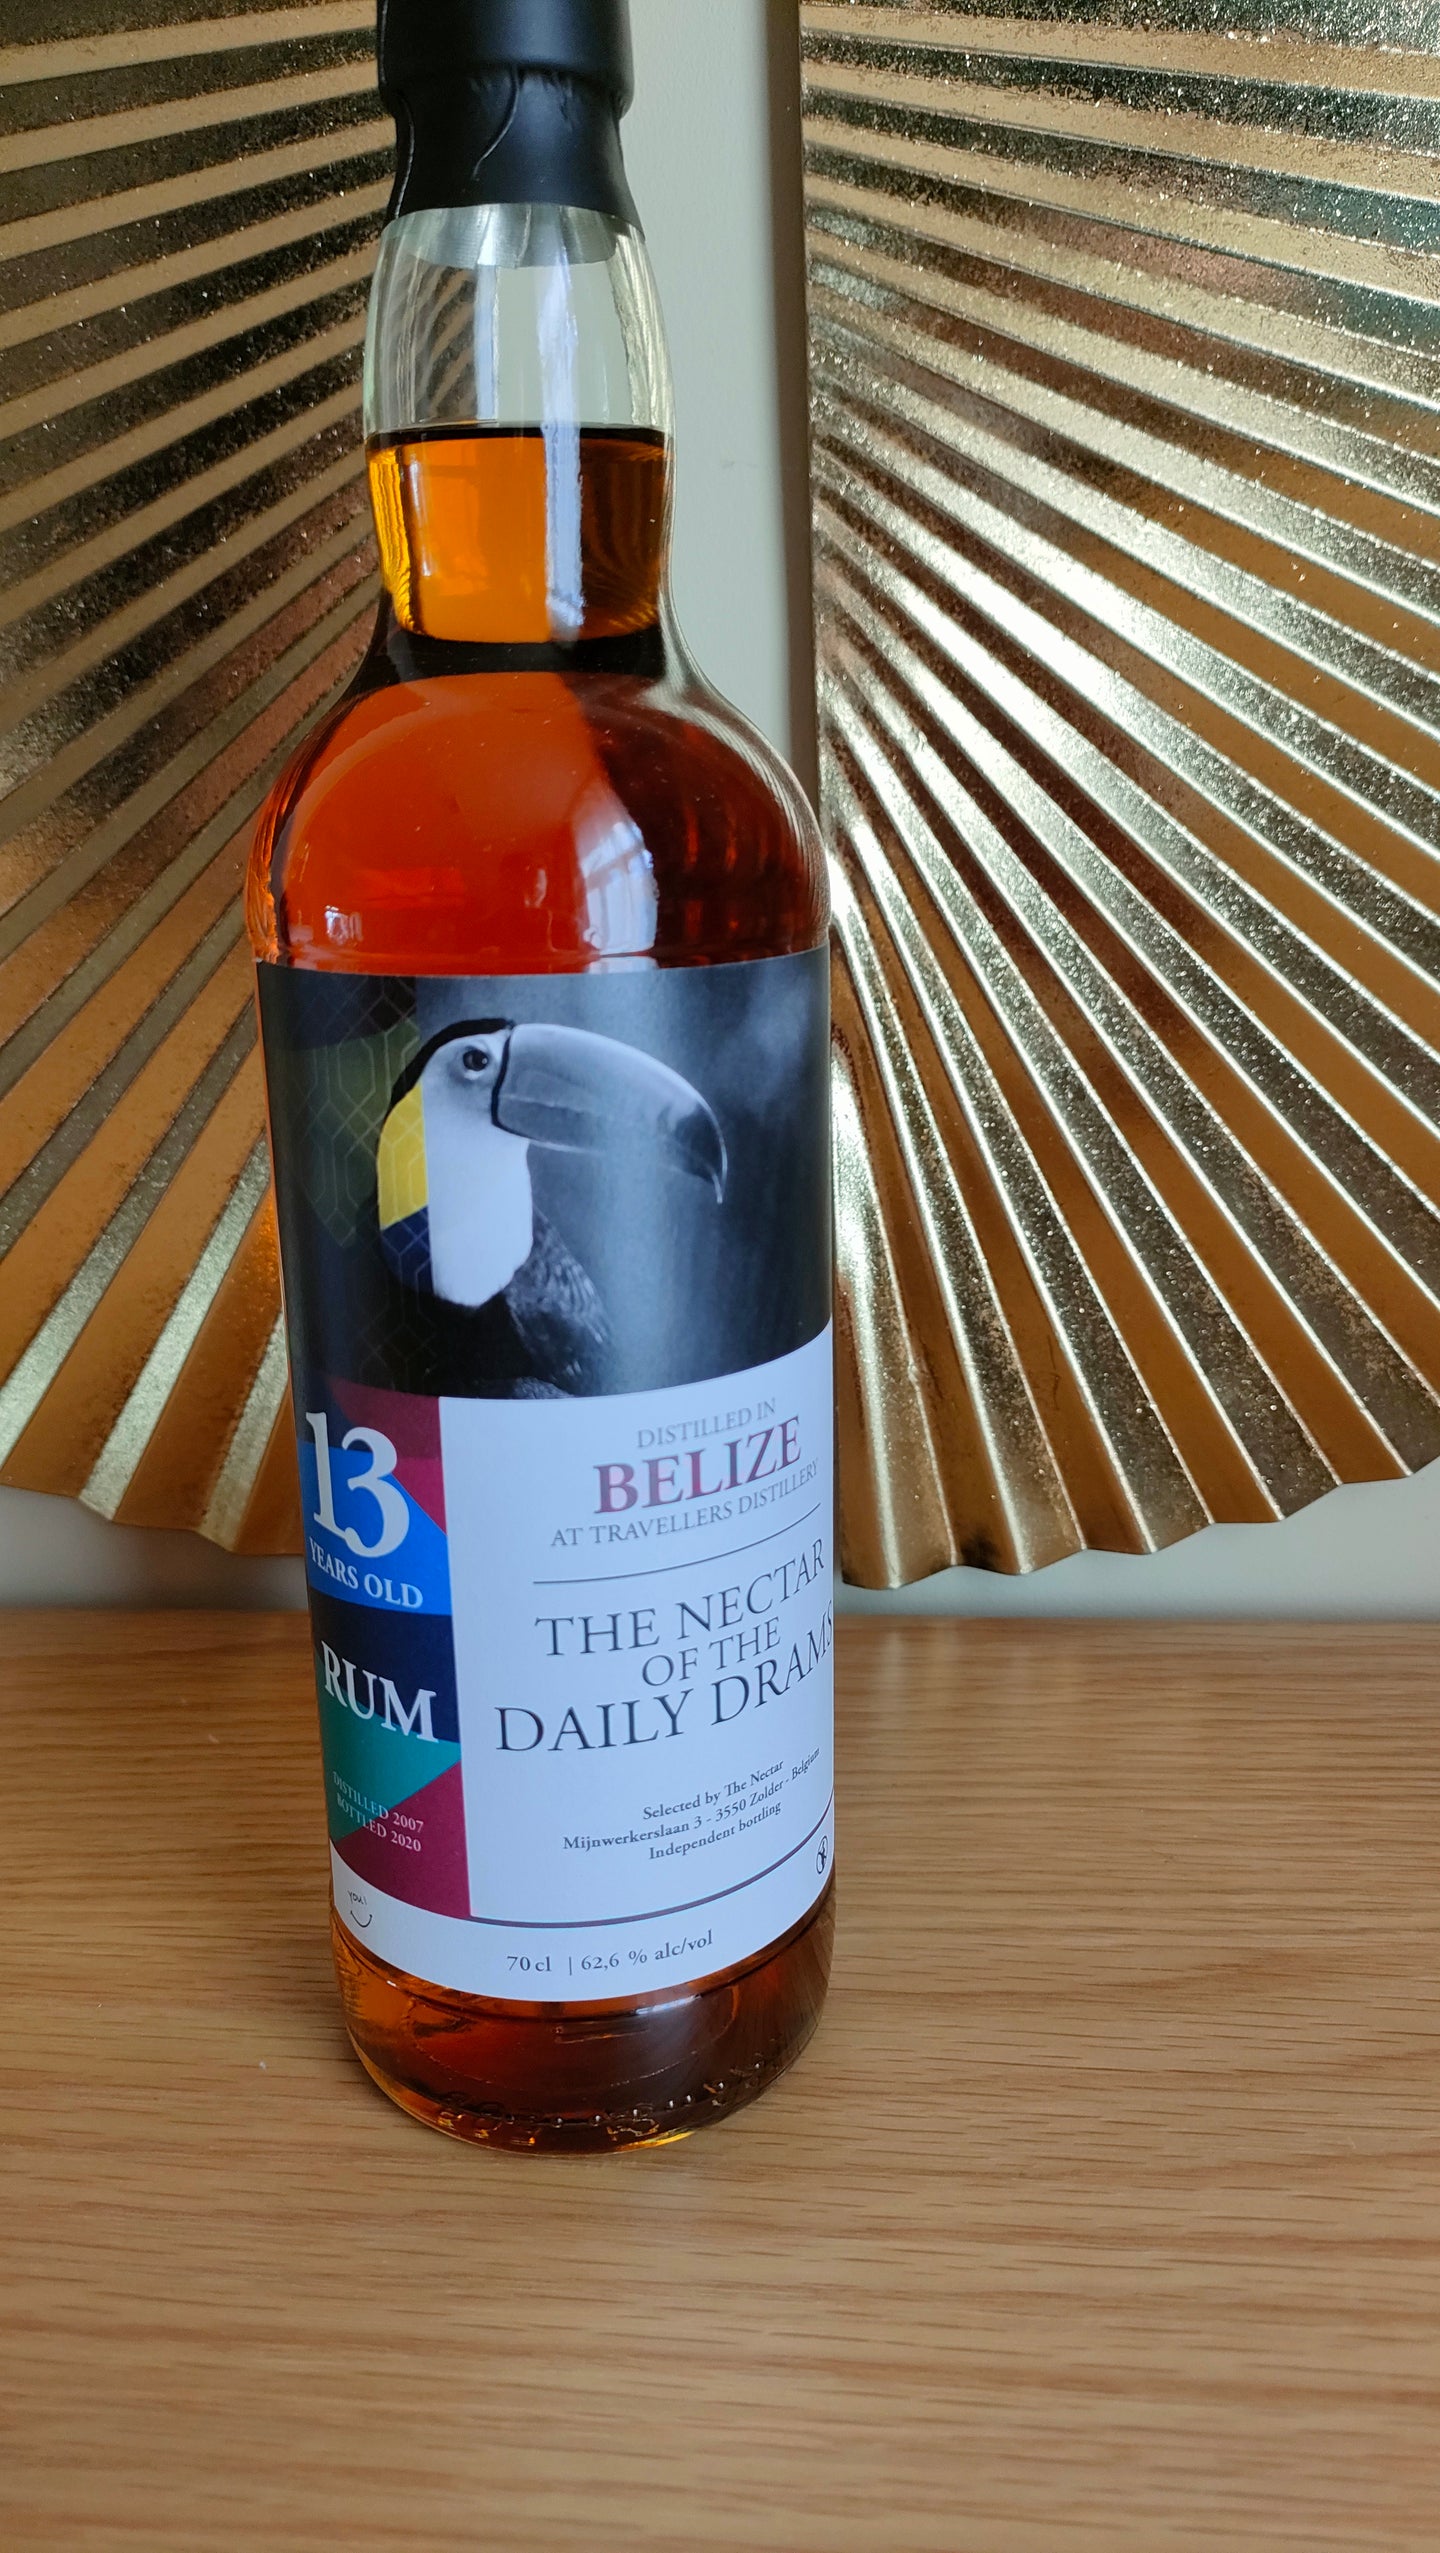 Belize 13 Ans 2007- The Nectar of daily dreams 62,6° - Ti-Rhum